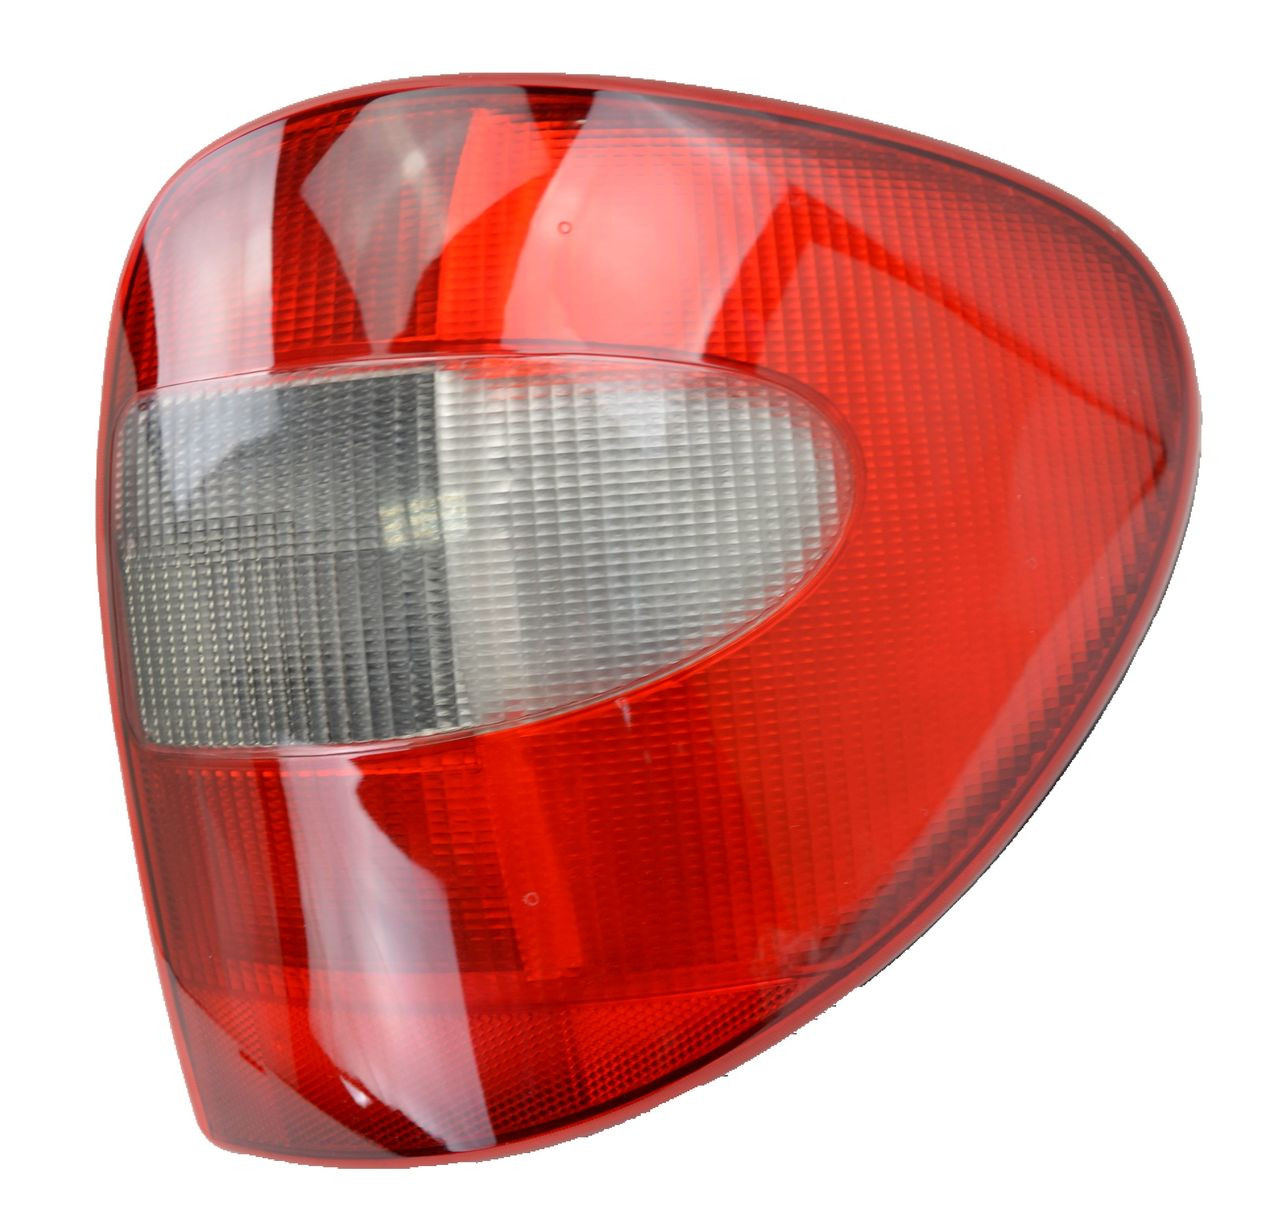 Tail light for Chrysler Grand Voyager 2002-2007 New Right RHS Rear Lamp 03 04 05 06